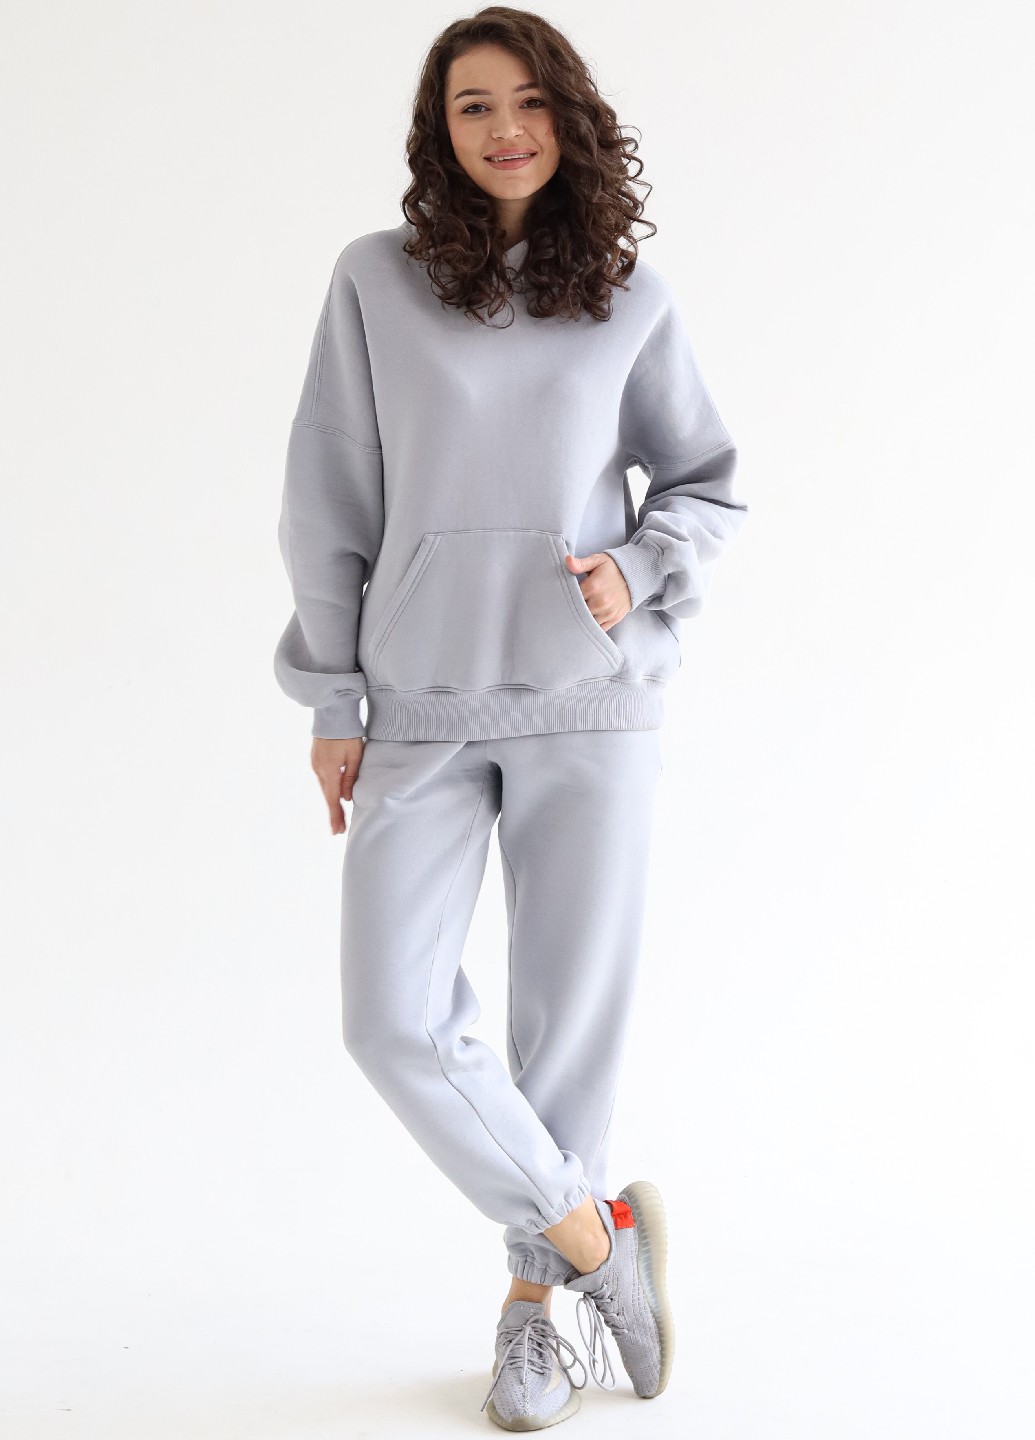 Tracksuits with Fleece - Hoodie and joggers - Grey color - Made in Ukraine - Rebellis